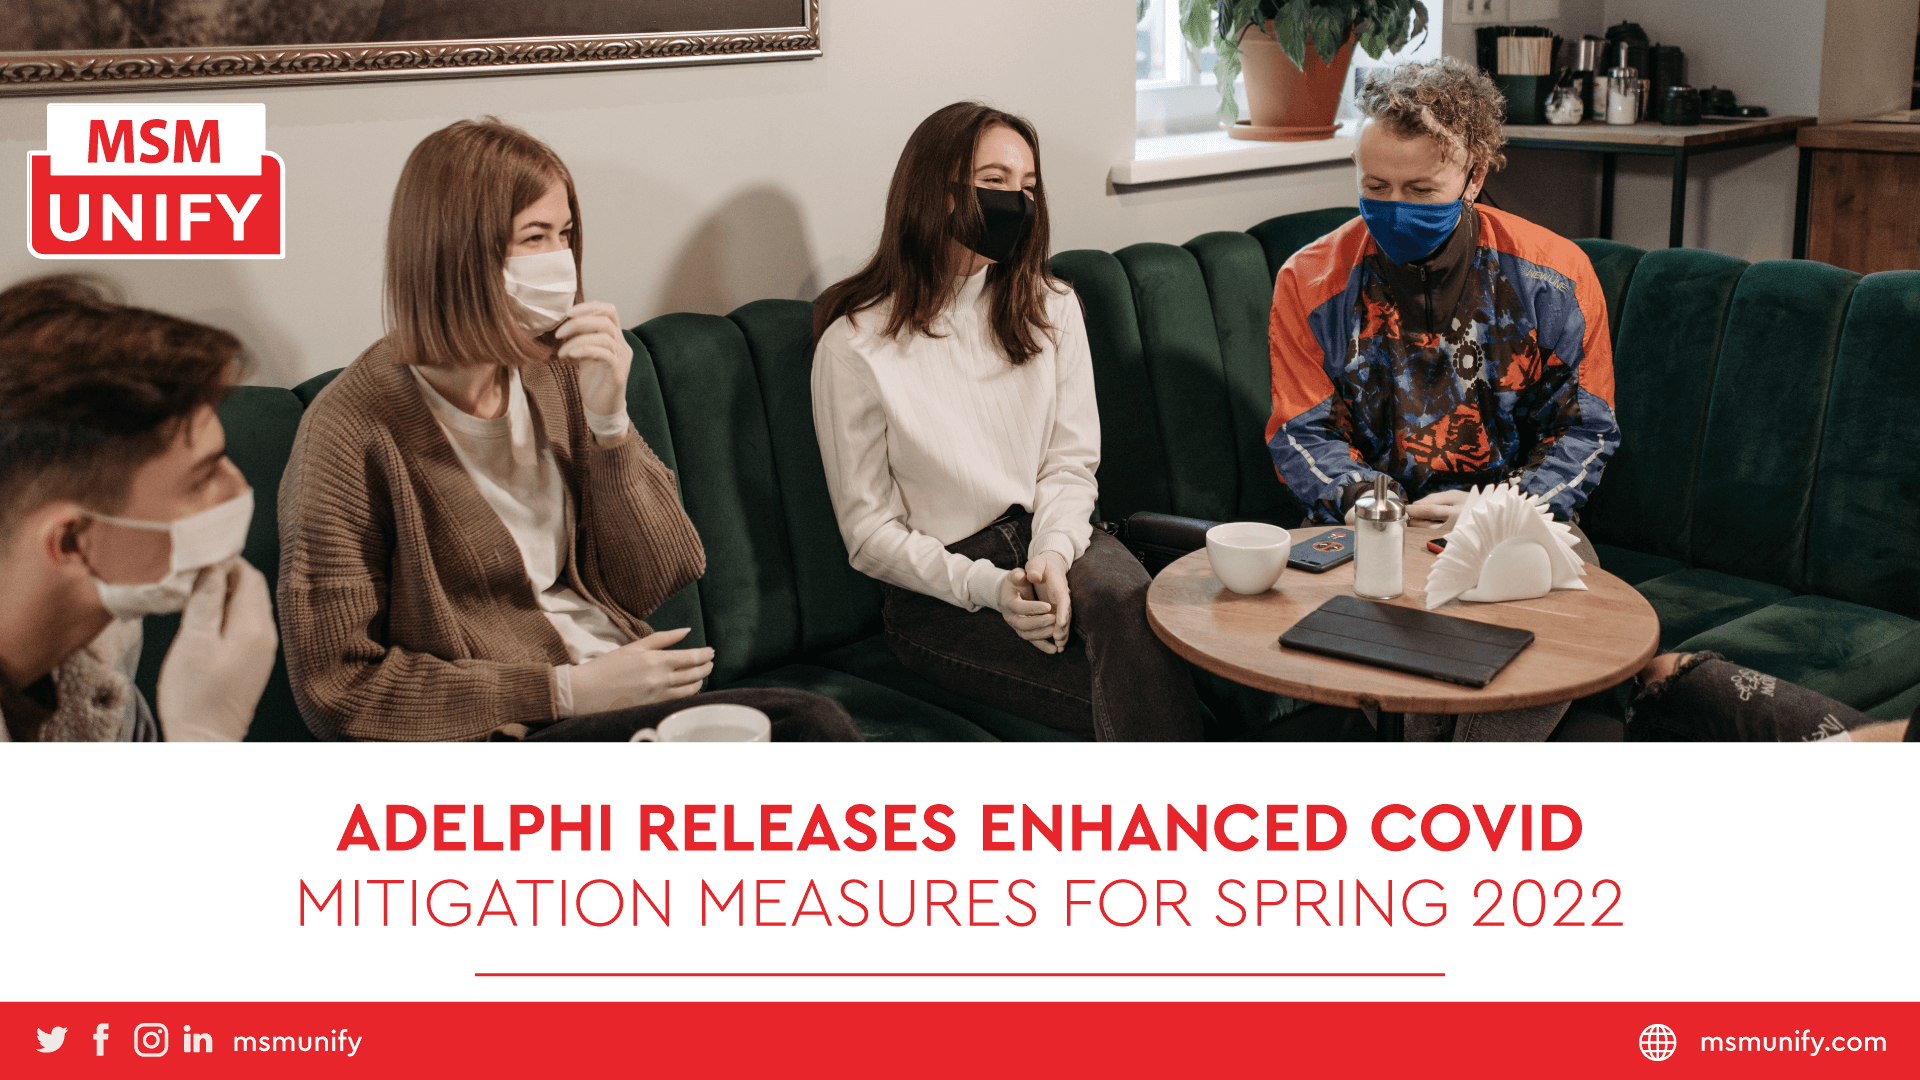 Adelphi Releases Enhanced COVID Mitigation Measures for Spring 2022